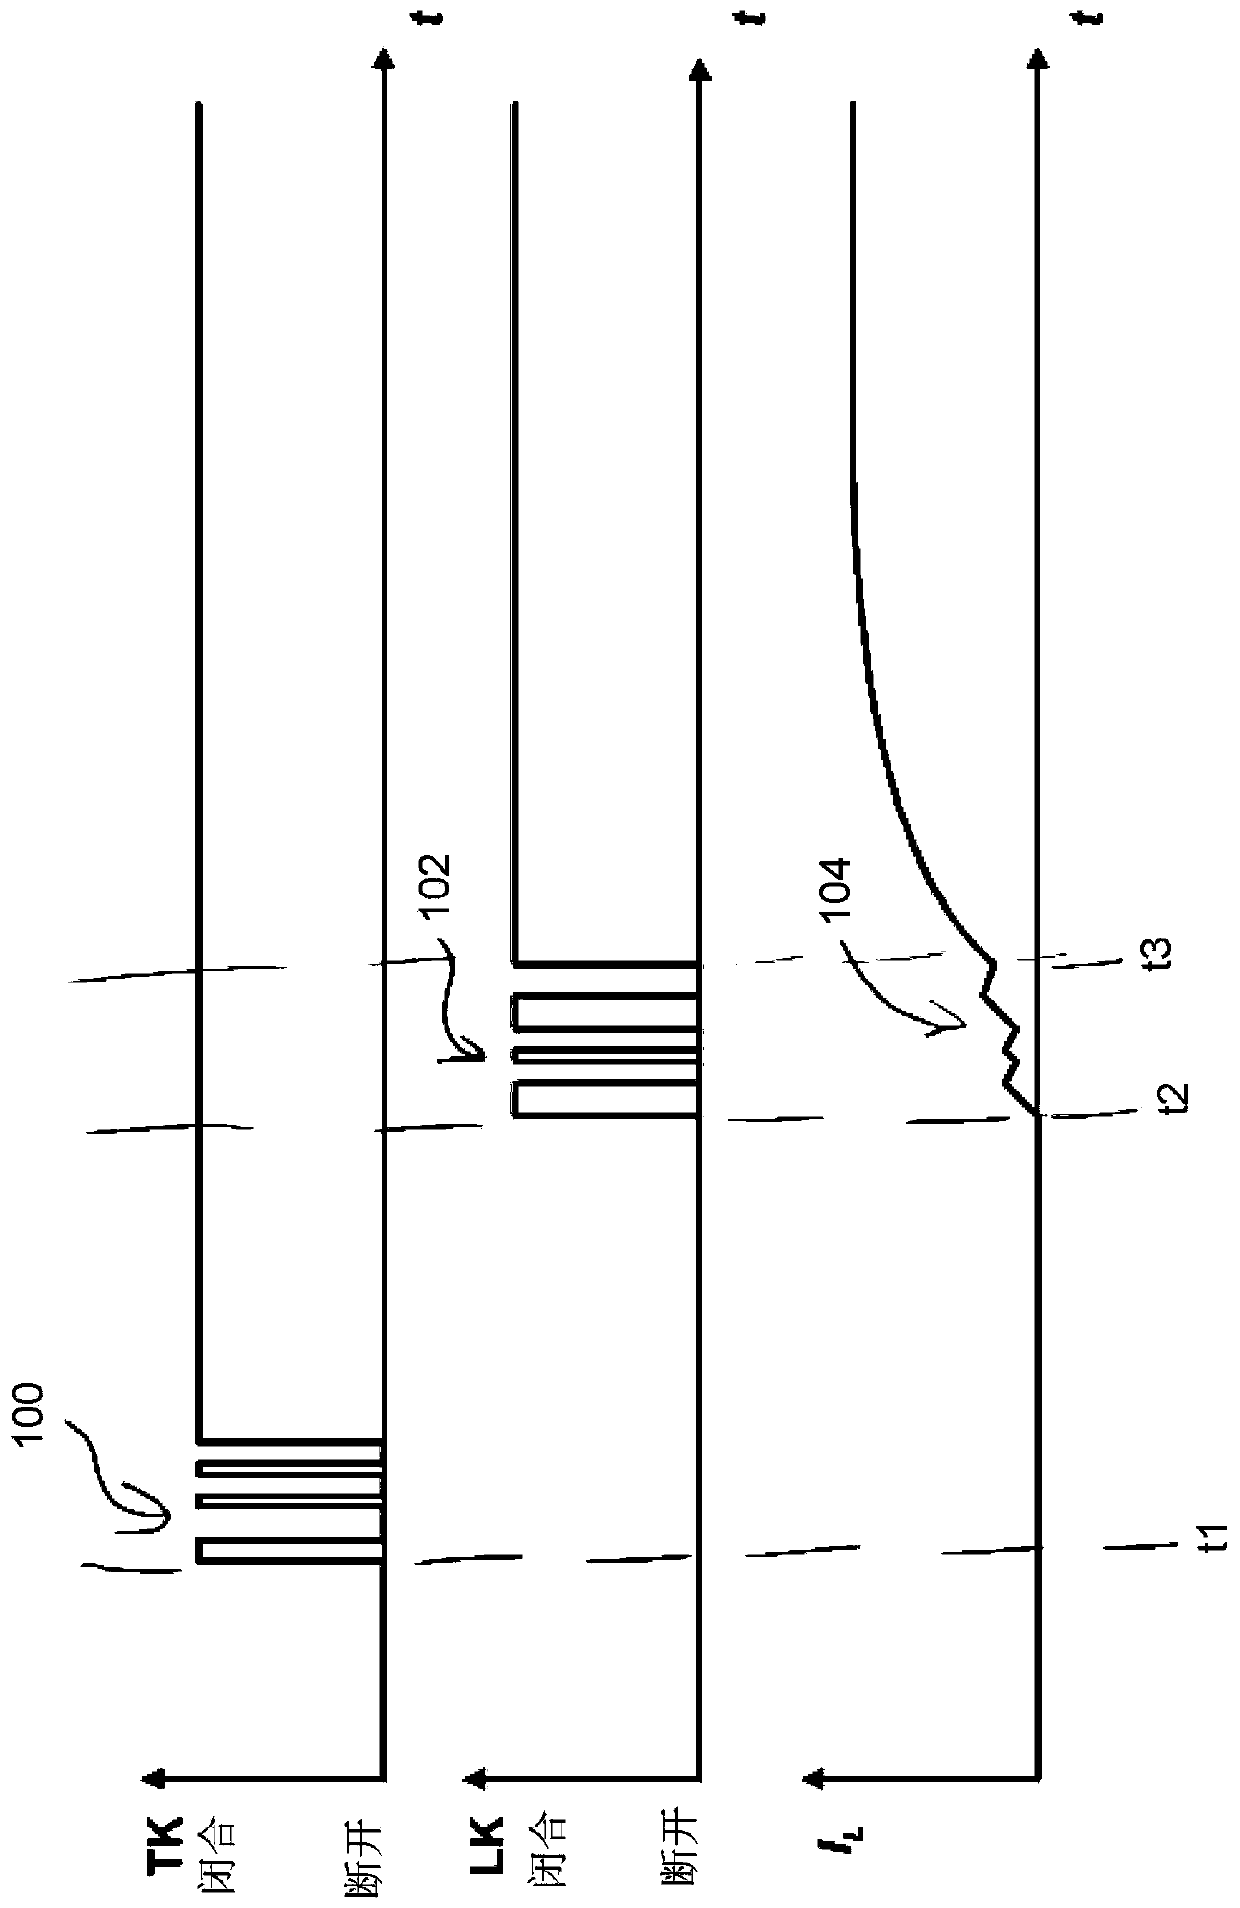 Switching apparatus for carrying and disconnecting electric currents, and switchgear having a switching apparatus of this kind